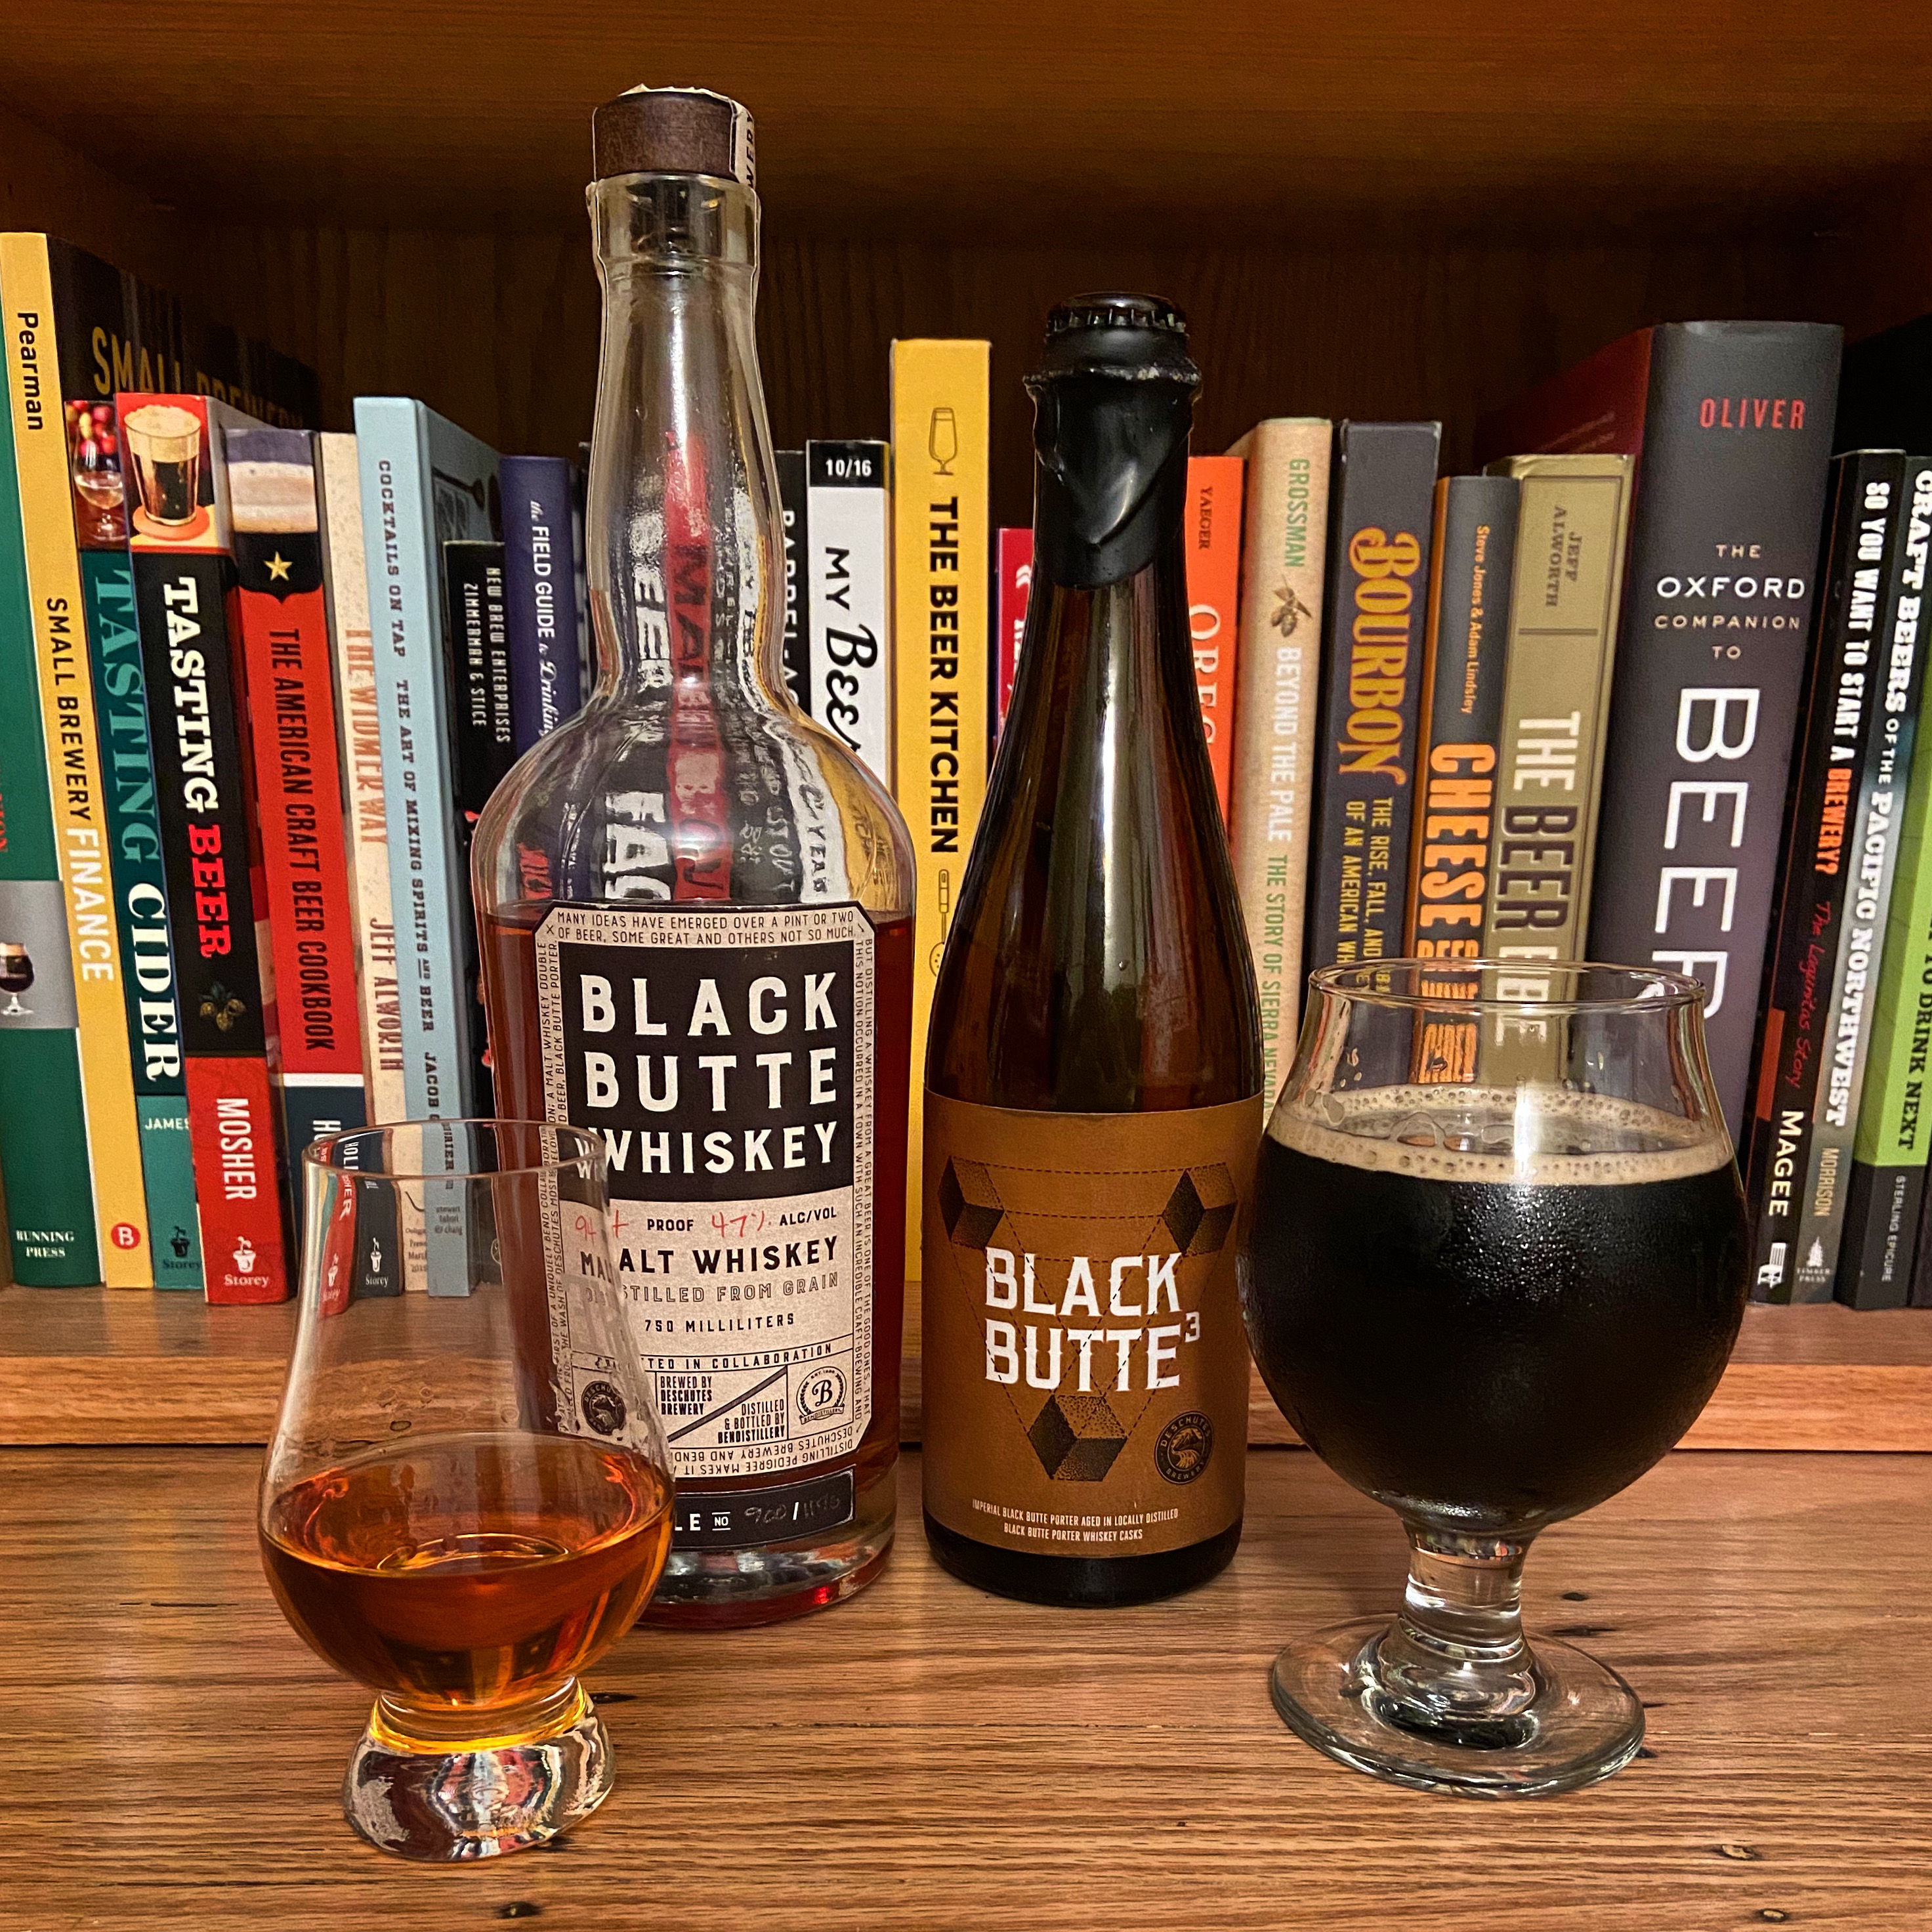 A bottle of Black Butte³ and paired with a dram of Black Butte Whiskey. This is a cask share between Deschutes Brewery and Bend Distillery (Crater Lake Spirits). Really digging the Black Butte³ that was aged in former Black Butte Whiskey barrels.